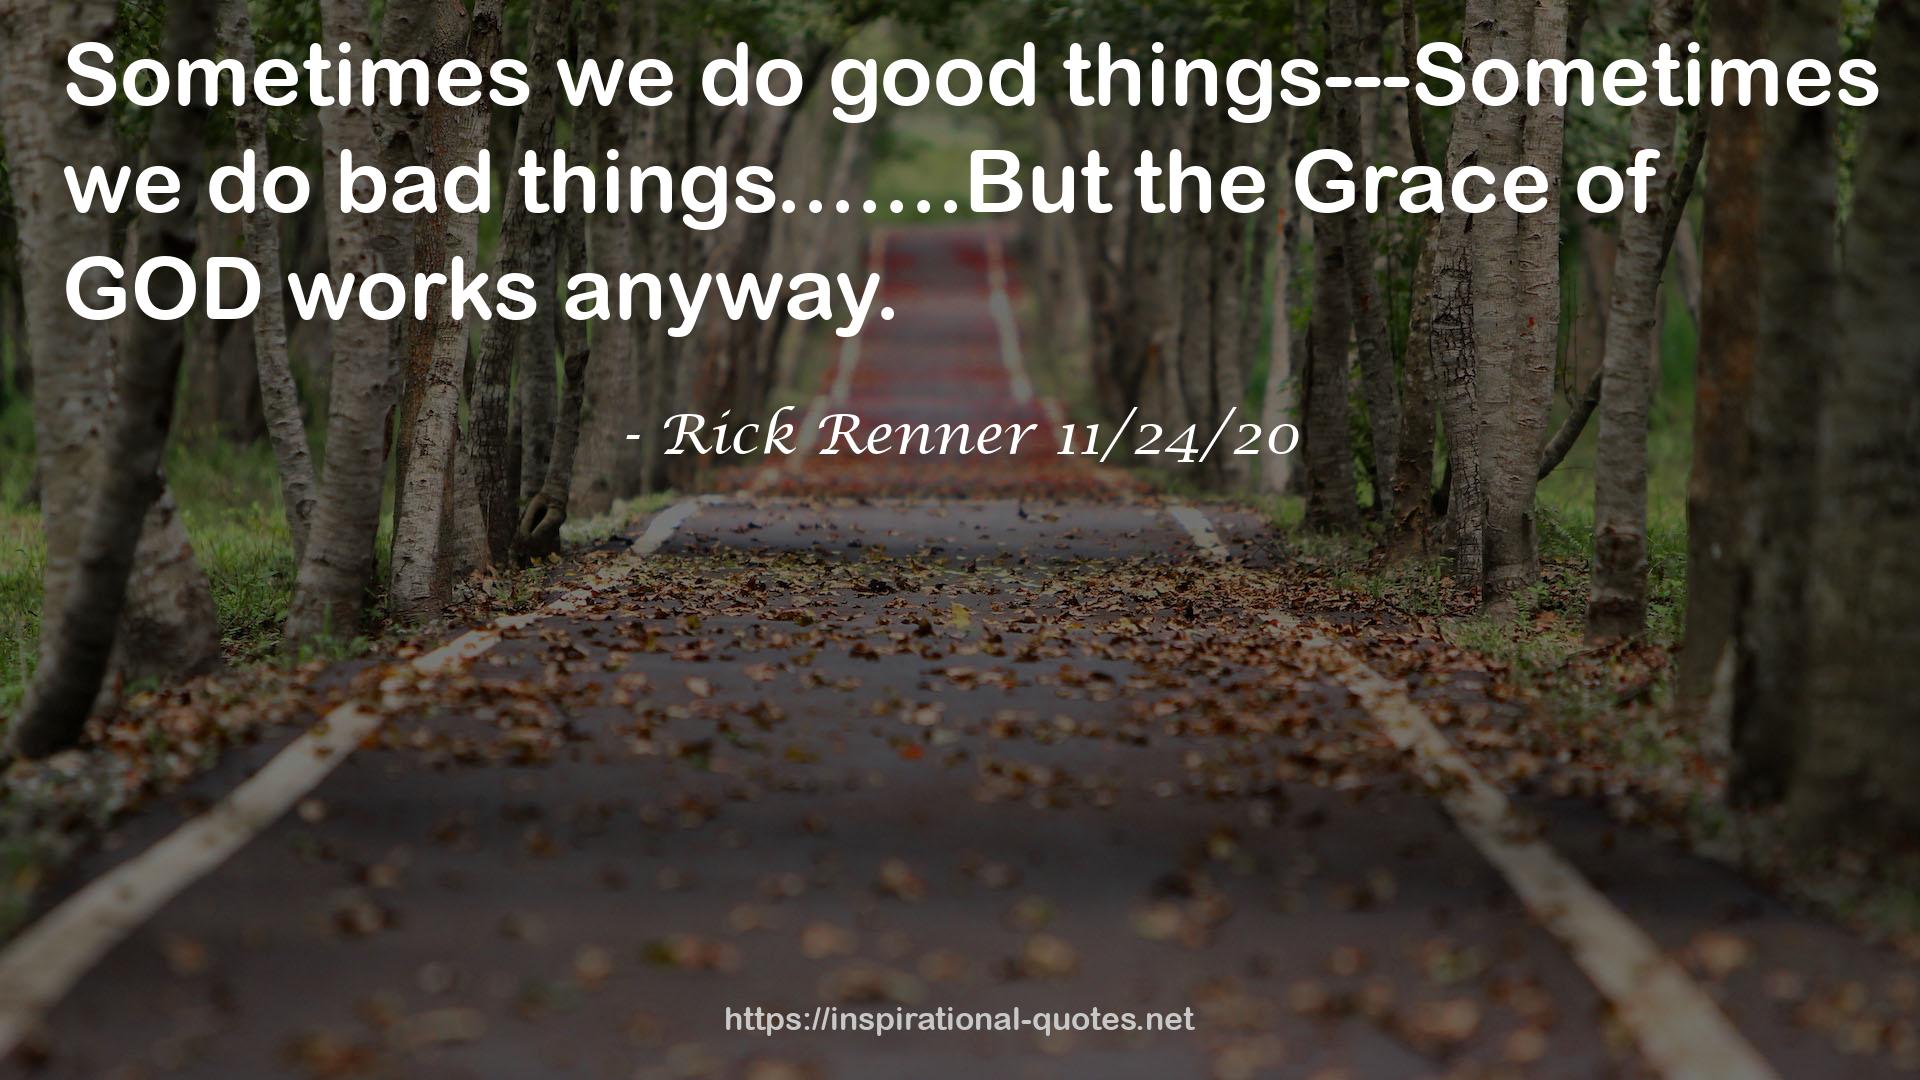 Rick Renner 11/24/20 QUOTES